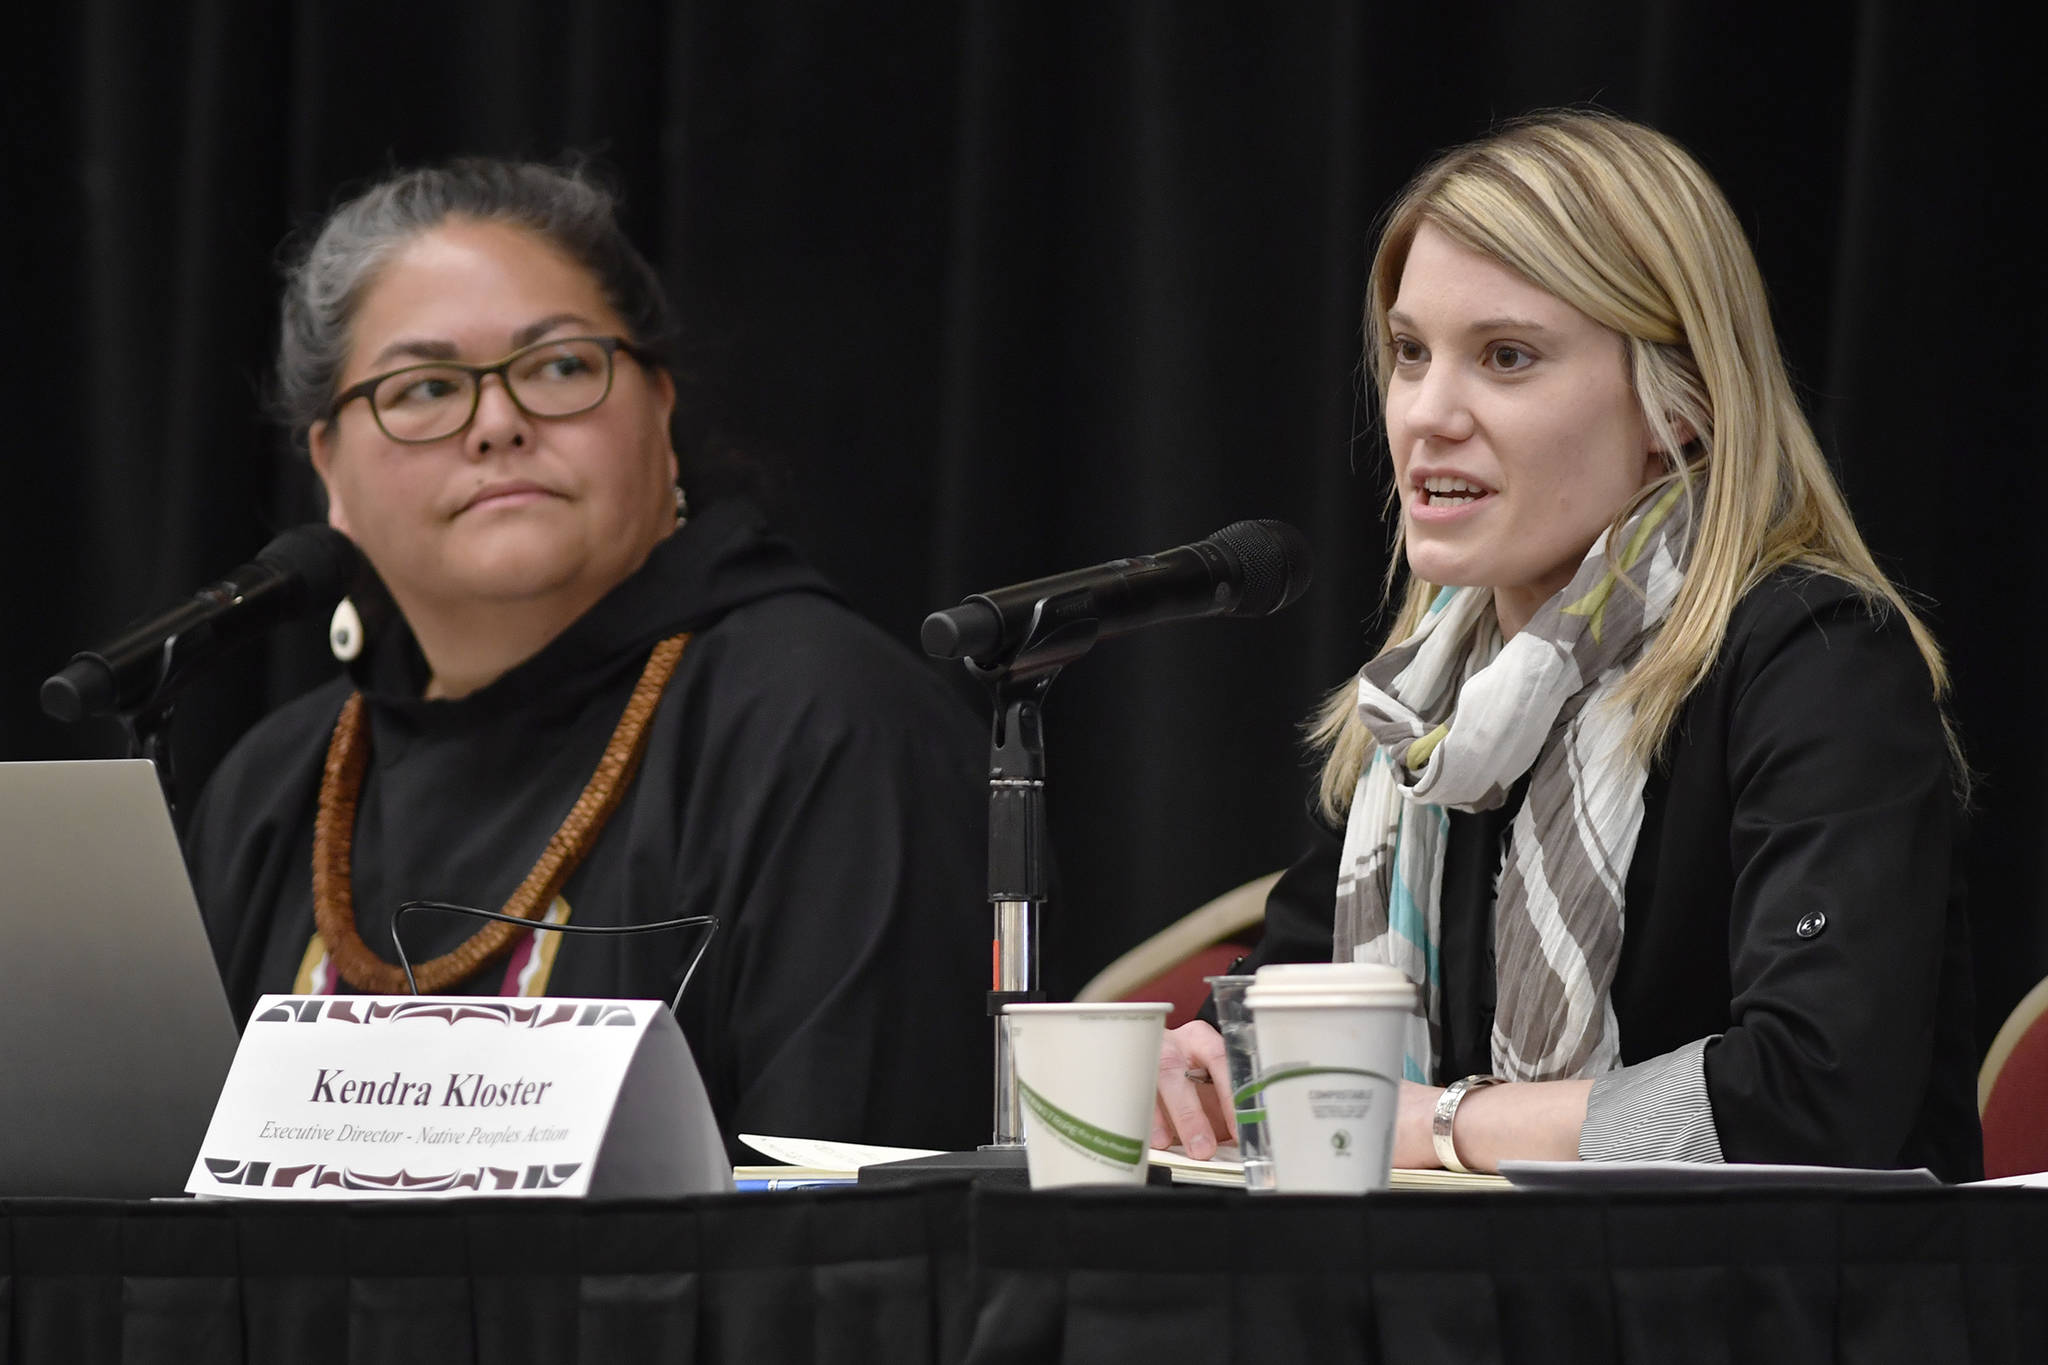 Kendra Kloster, executive director of the Native Poples Action, right, and Liz Medicine Crow, President and CEO of the Alaska Native Policy Center, speak at the Native Issues Forum at Elizabeth Peratrovich Hall on Wednesday, Feb. 20, 2019. (Michael Penn | Juneau Empire)